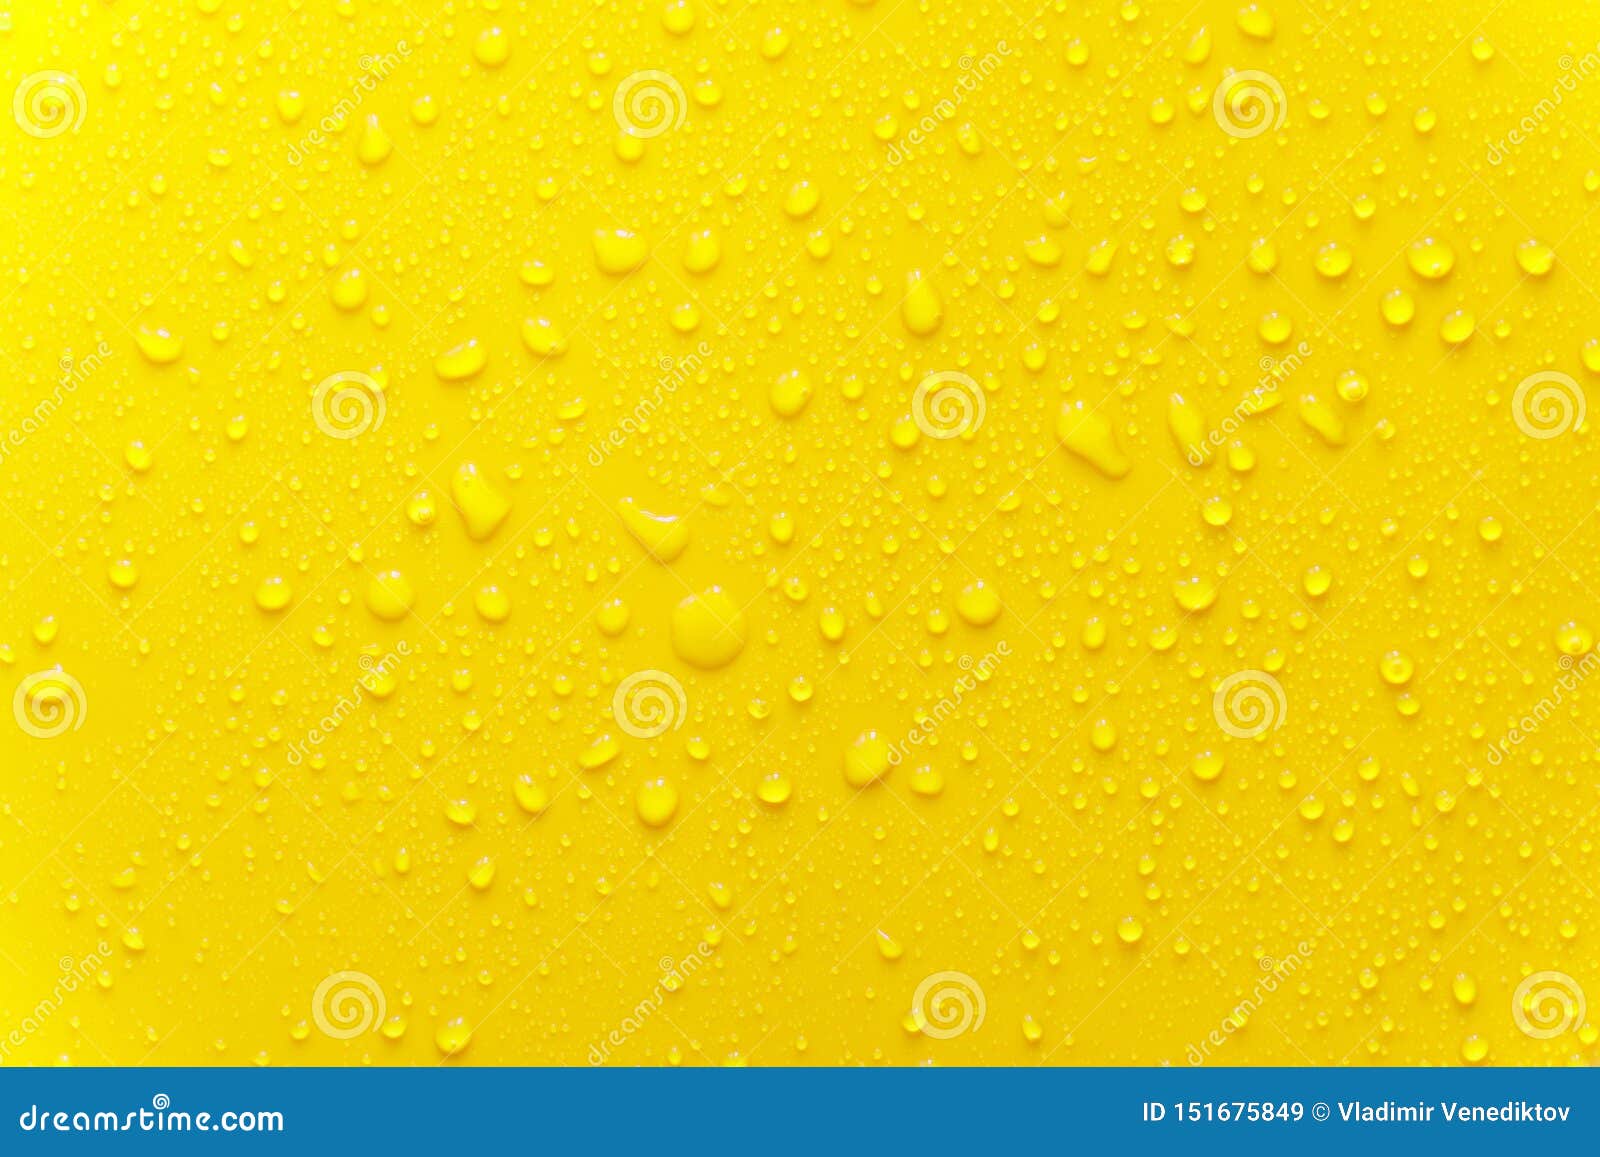 Water Drop Texture Close-up on Yellow Matte Background Stock Image - Image  of transparent, clean: 151675849